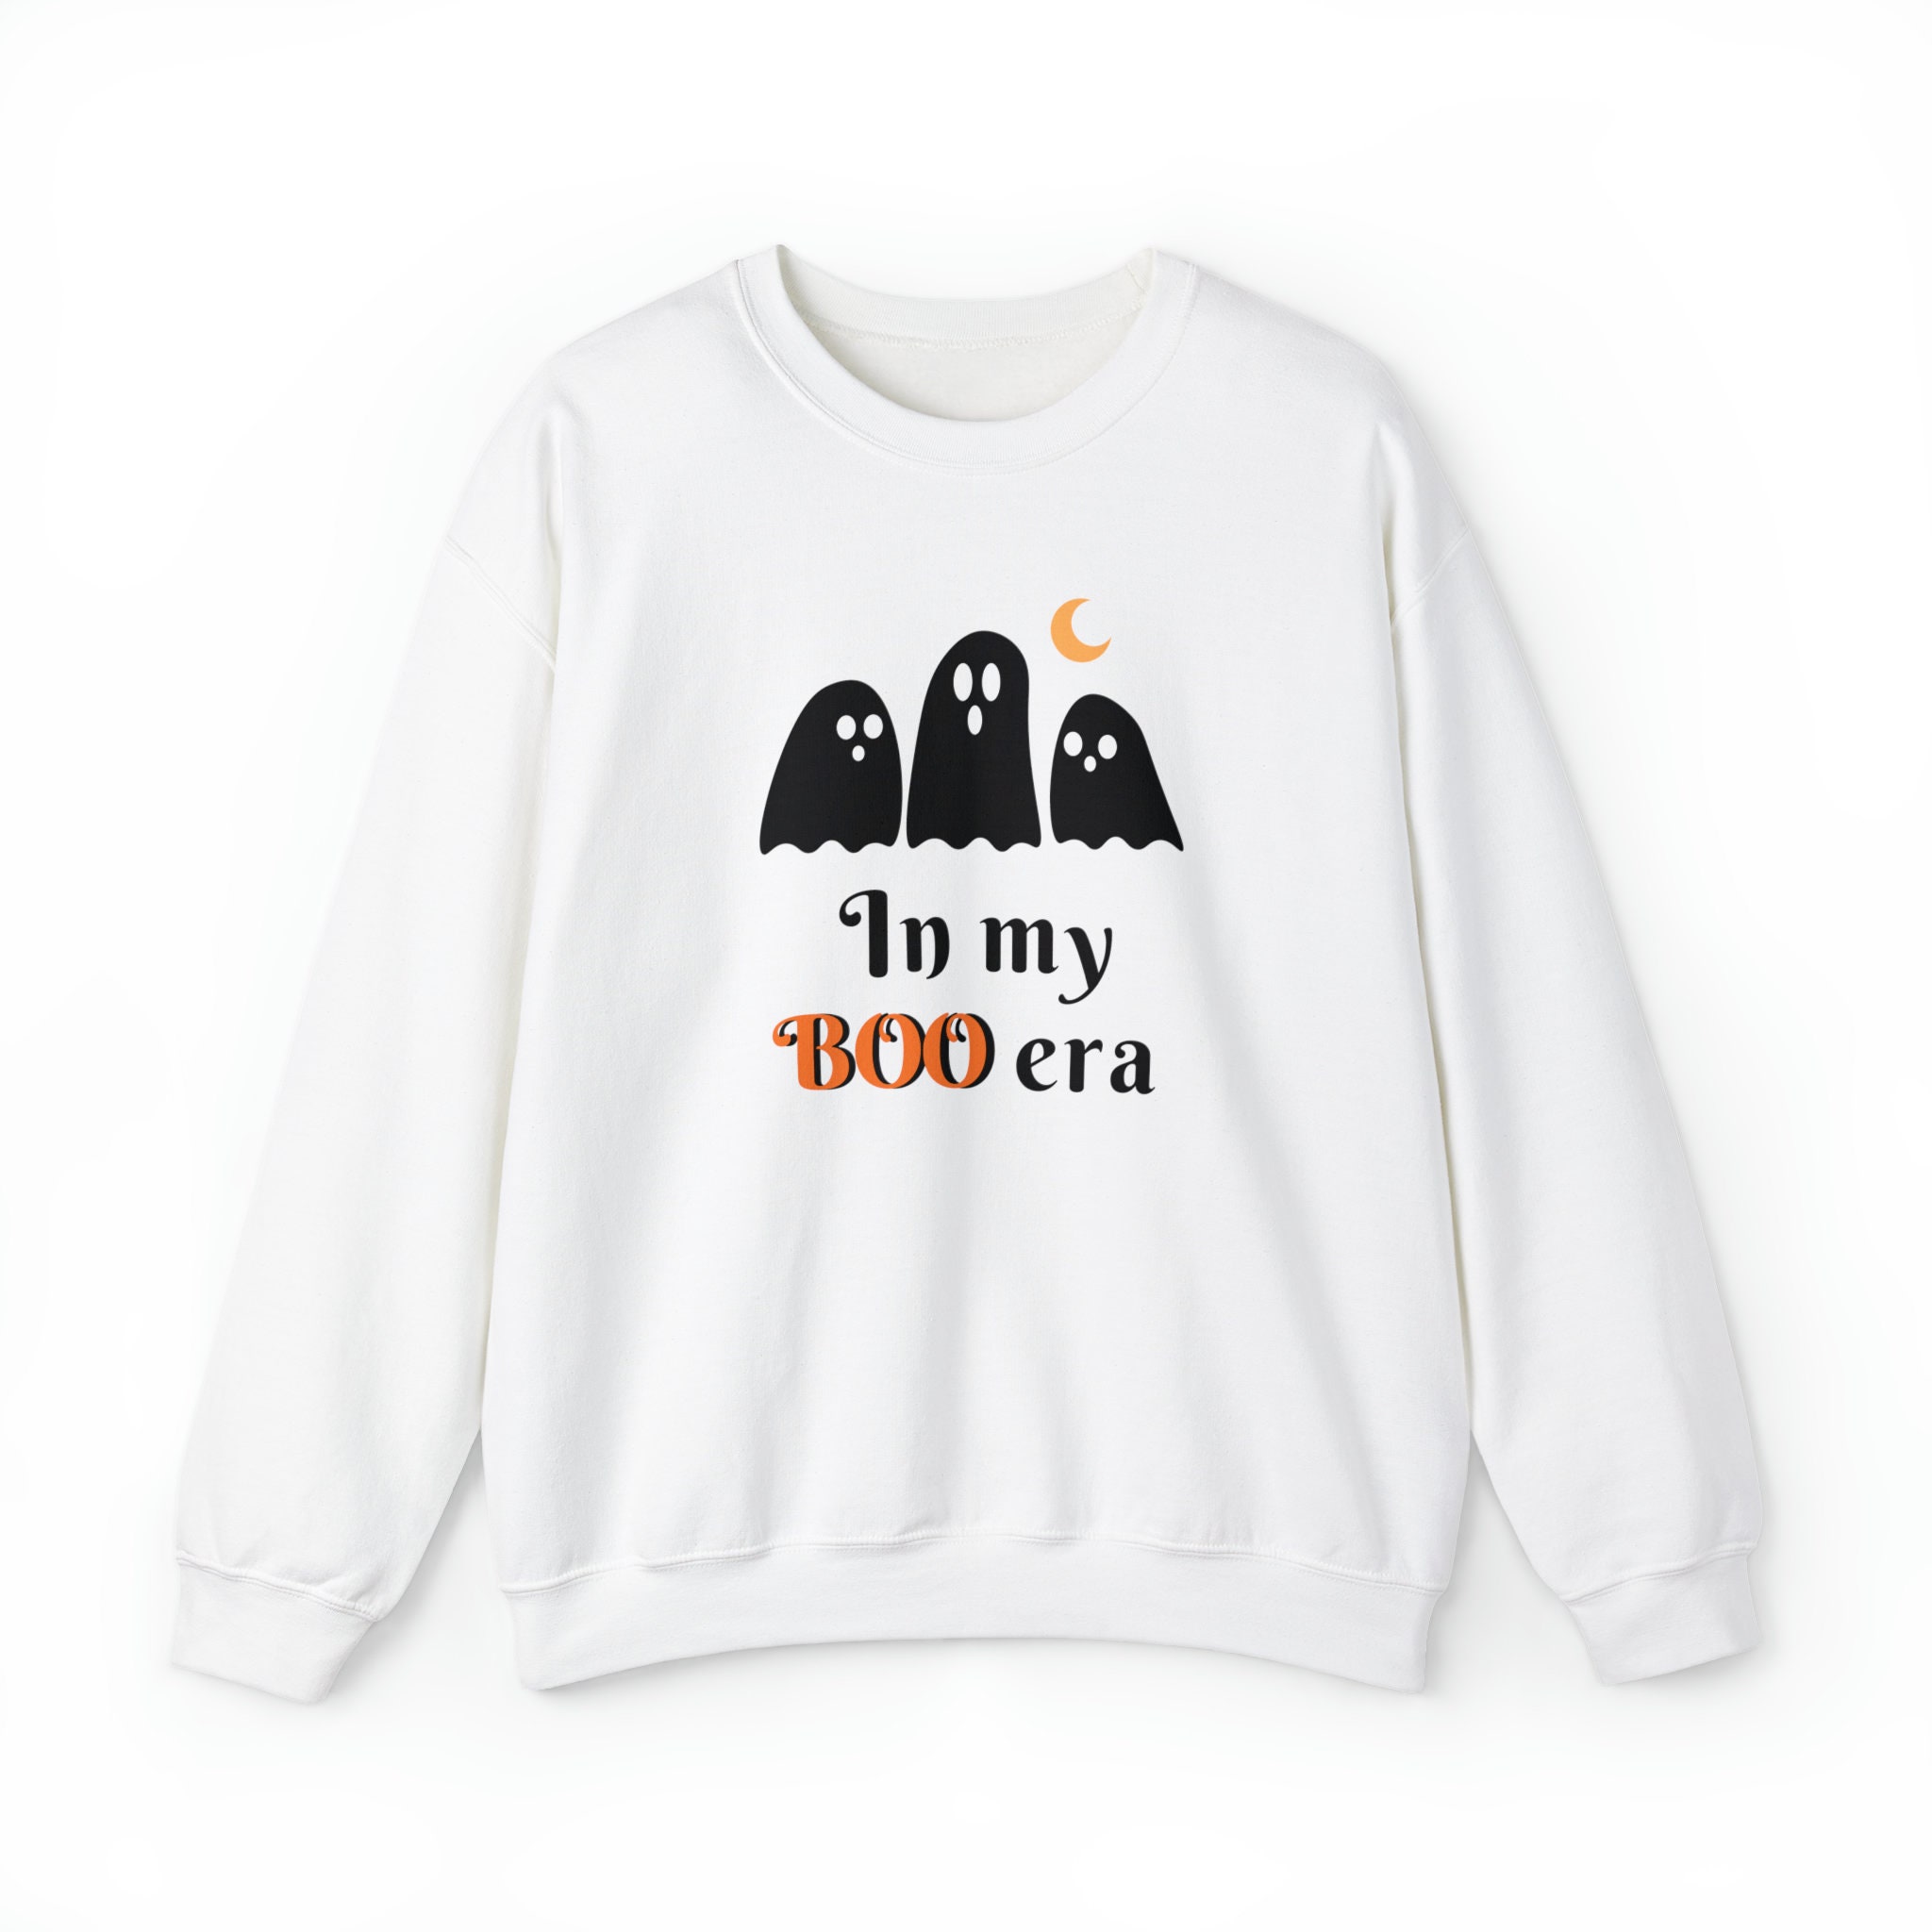 Discover Cute Black Ghost In My Boo Era Halloween Crewneck Sweatshirt, to get into the fall spirit - inclusive sizes - gray yellow pink blue white